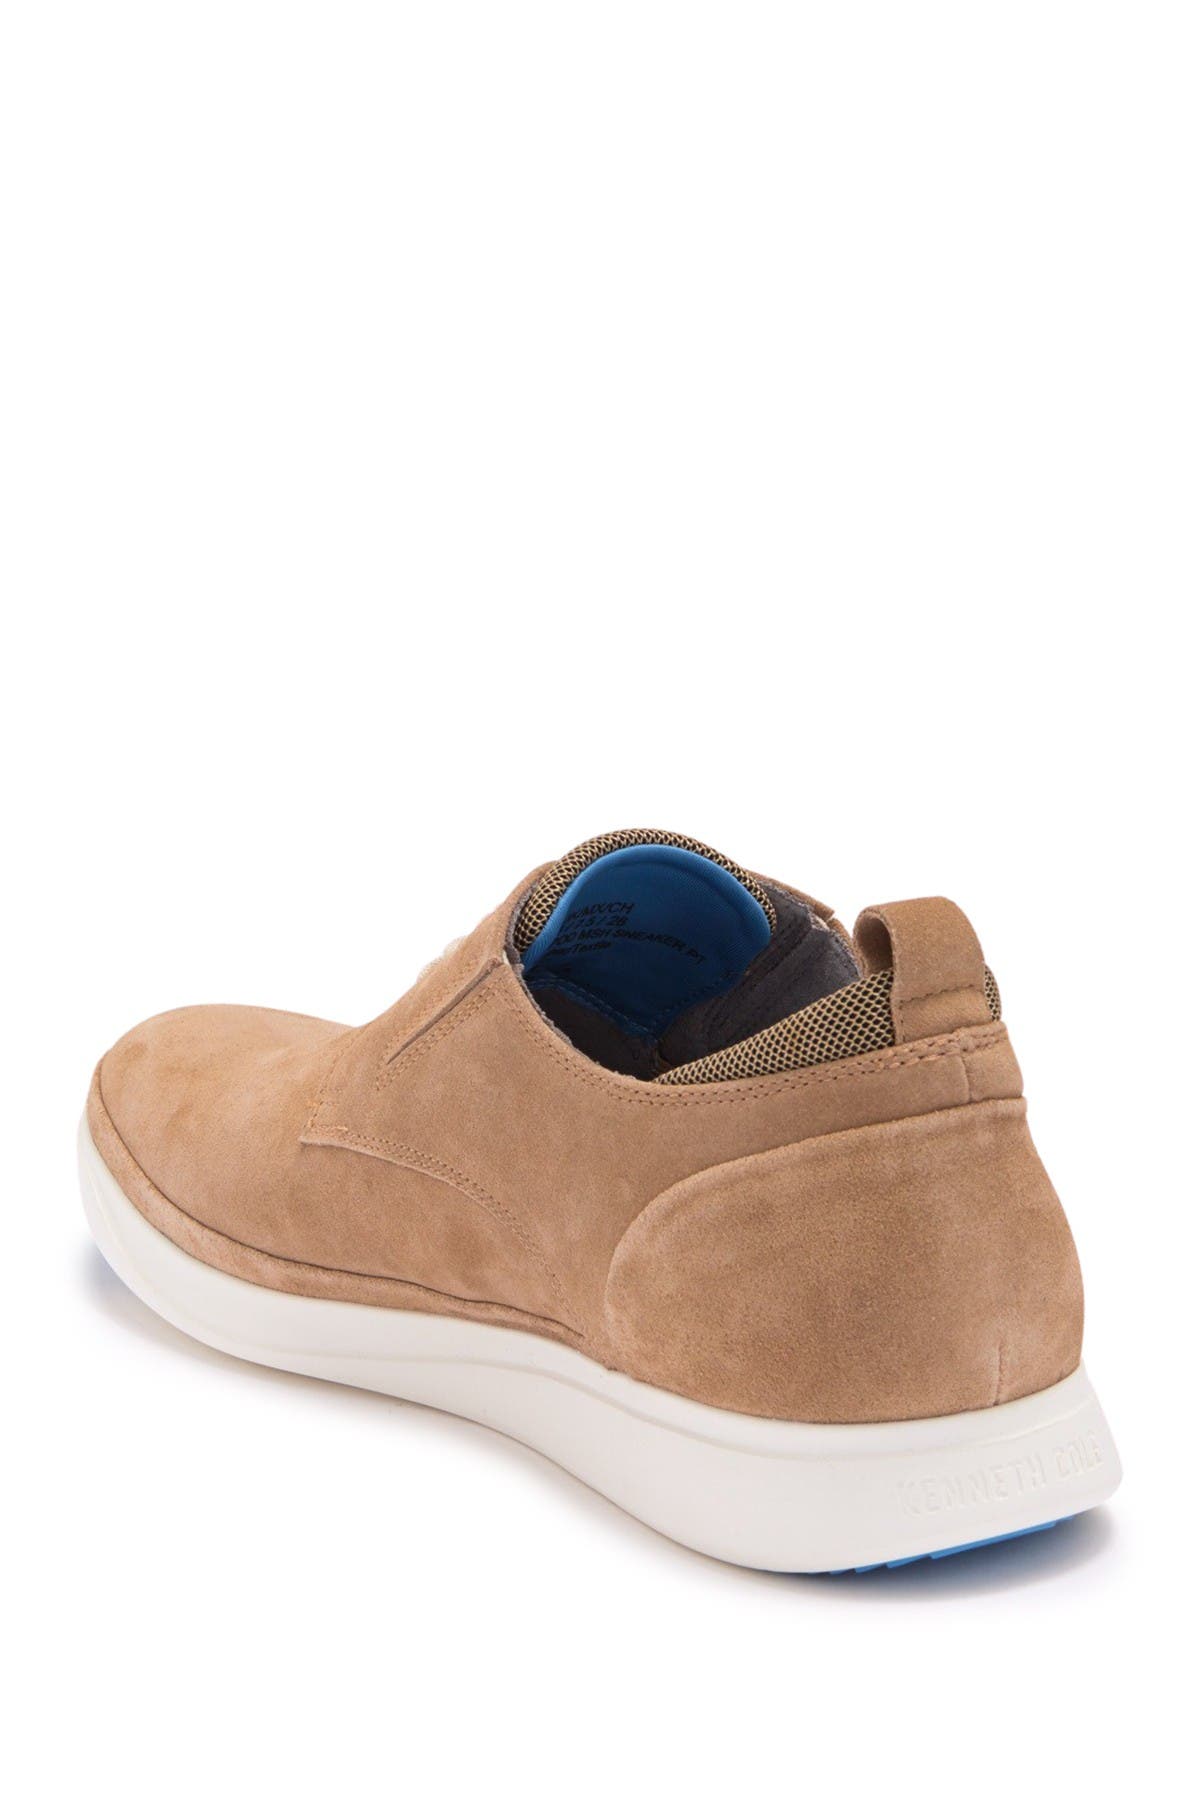 kenneth cole suede sneakers